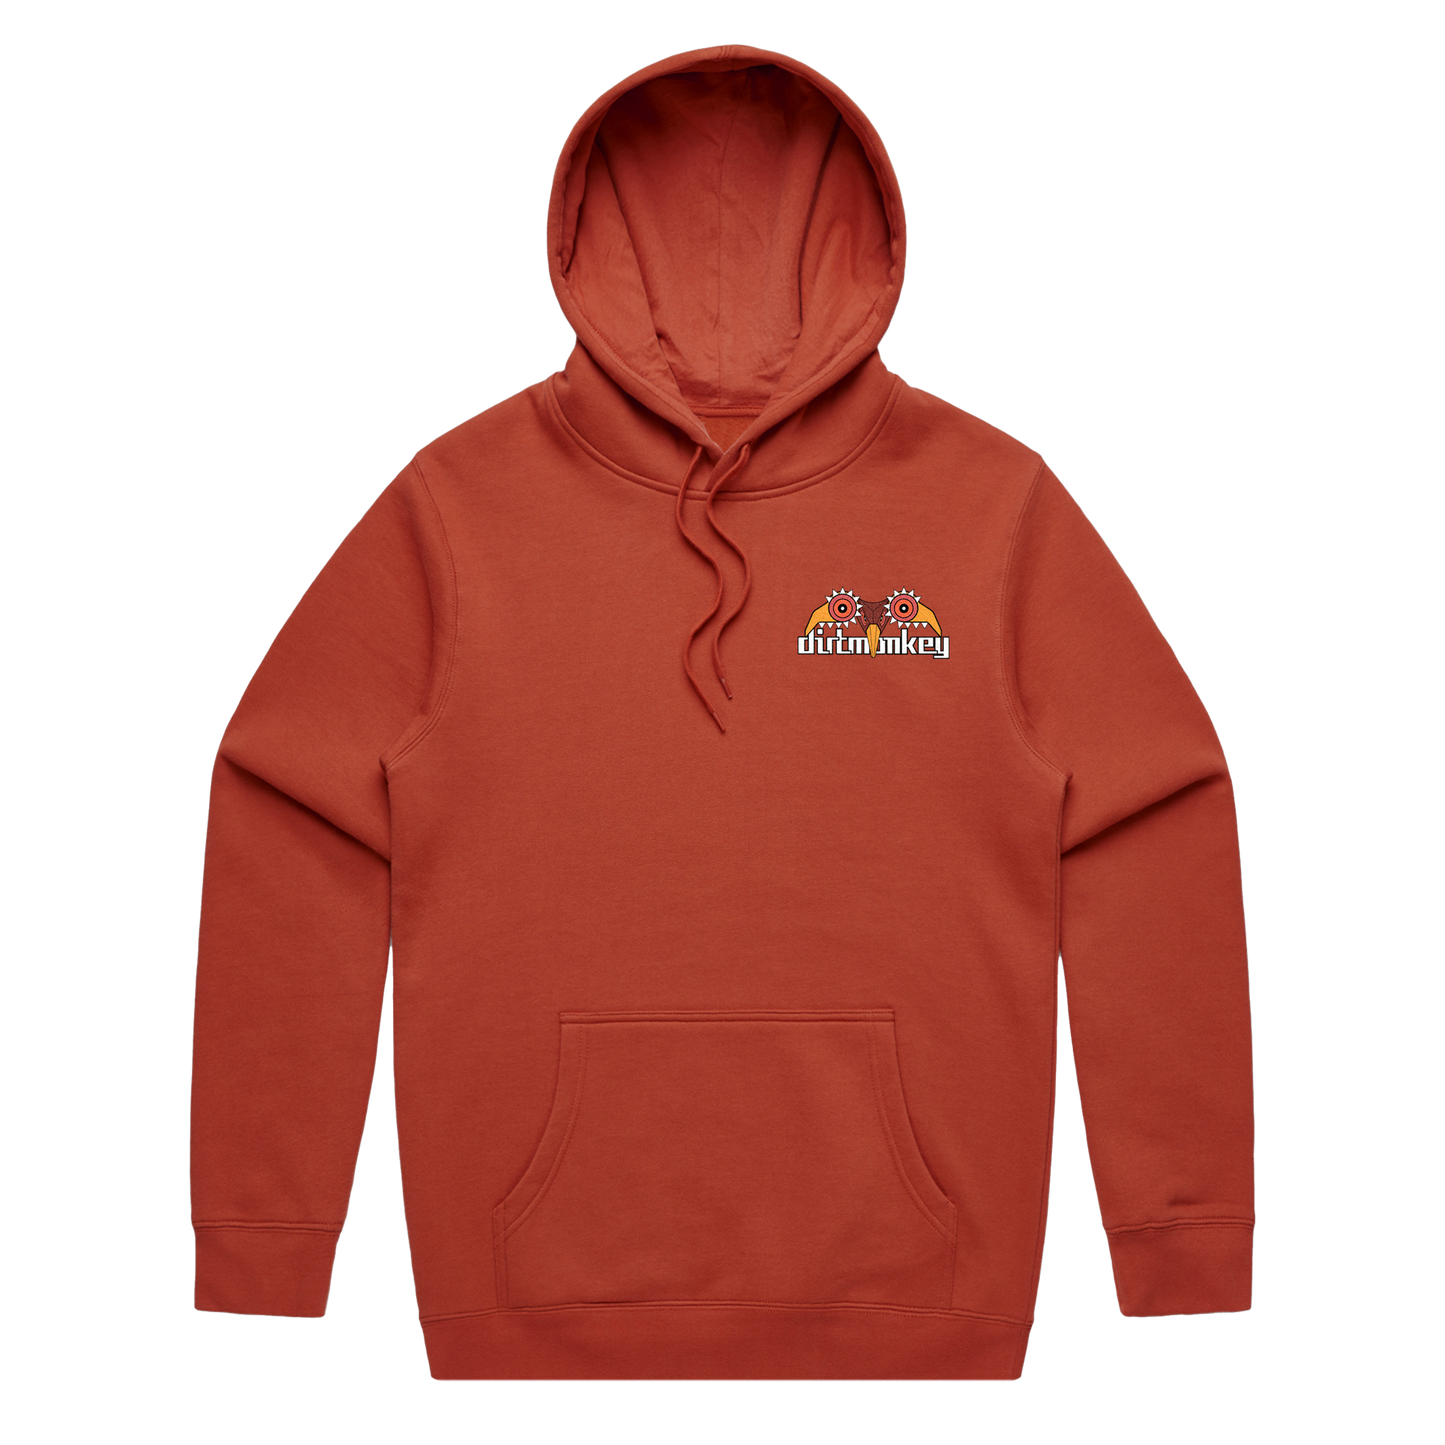 Dirt Monkey - Stomping Grounds - Pullover Hoodie